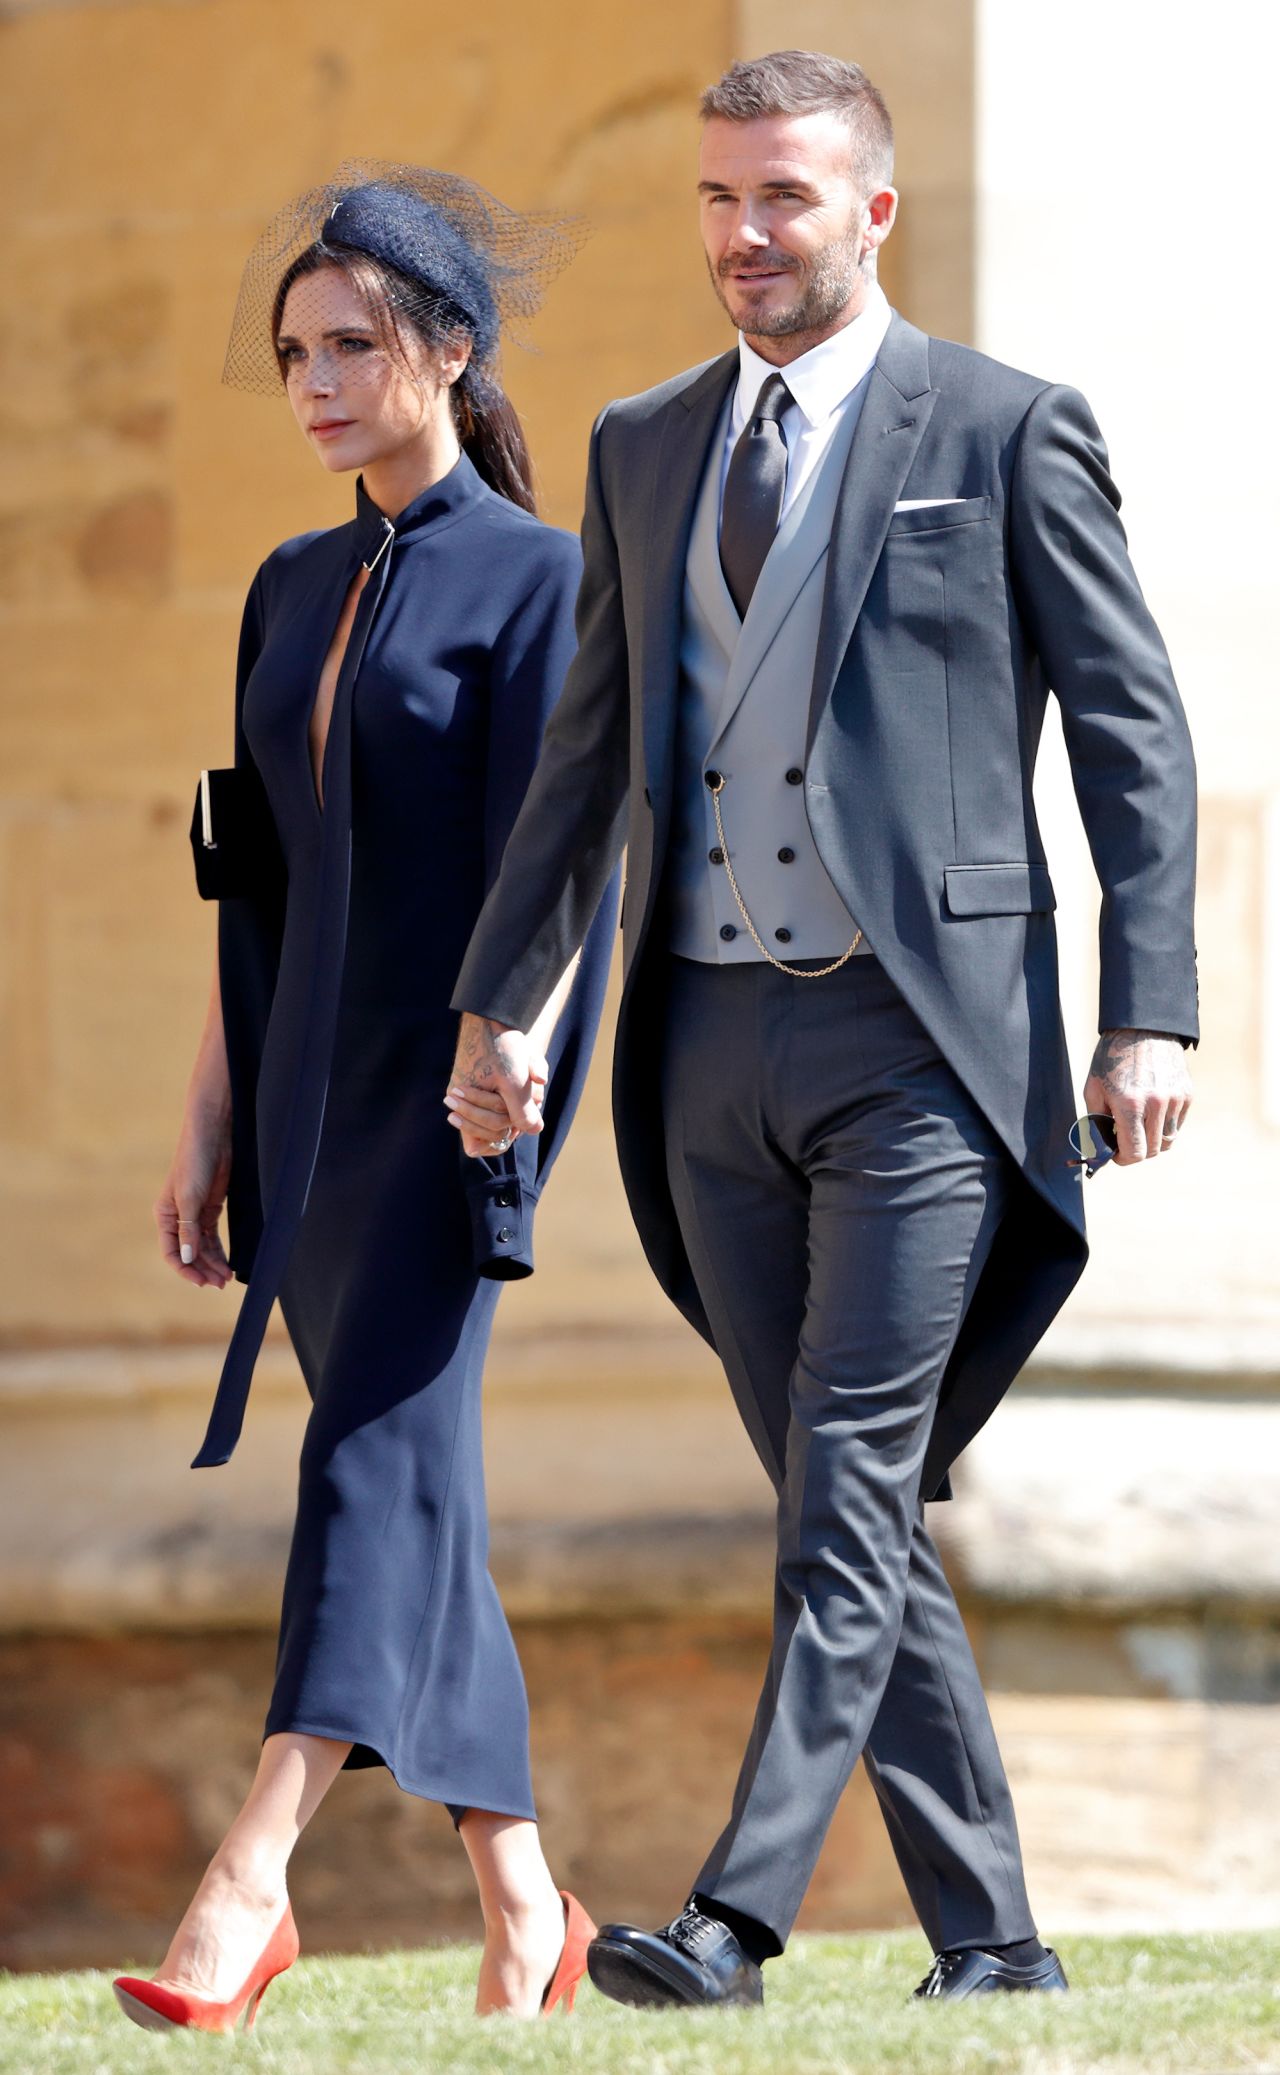 Victoria Beckham and David Beckham attend the wedding of Prince Harry to Ms Meghan Markle at St George's Chapel, Windsor Castle on May 19, 2018 in Windsor, England. Prince Henry Charles Albert David of Wales marries Ms. Meghan Markle in a service at St George's Chapel inside the grounds of Windsor Castle. Among the guests were 2200 members of the public, the royal family and Ms. Markle's Mother Doria Ragland. (Photo by Max Mumby/Indigo/Getty Images)